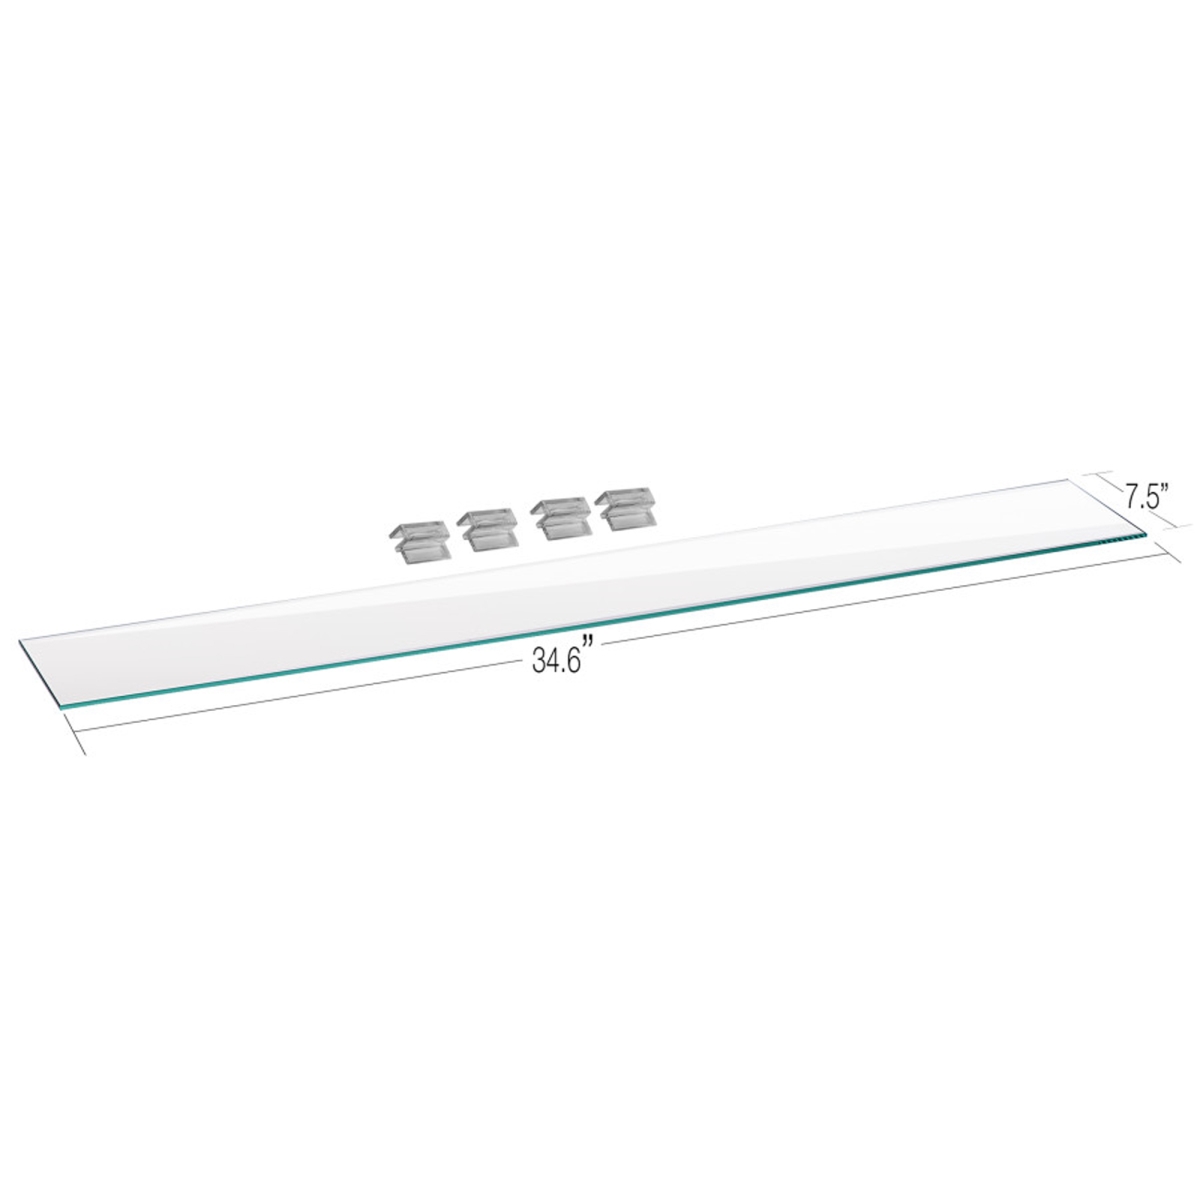 Picture of Aquatop 819603018691 12 gal Glass Lid & Clips for The HCA-12G Bookshelf Tank